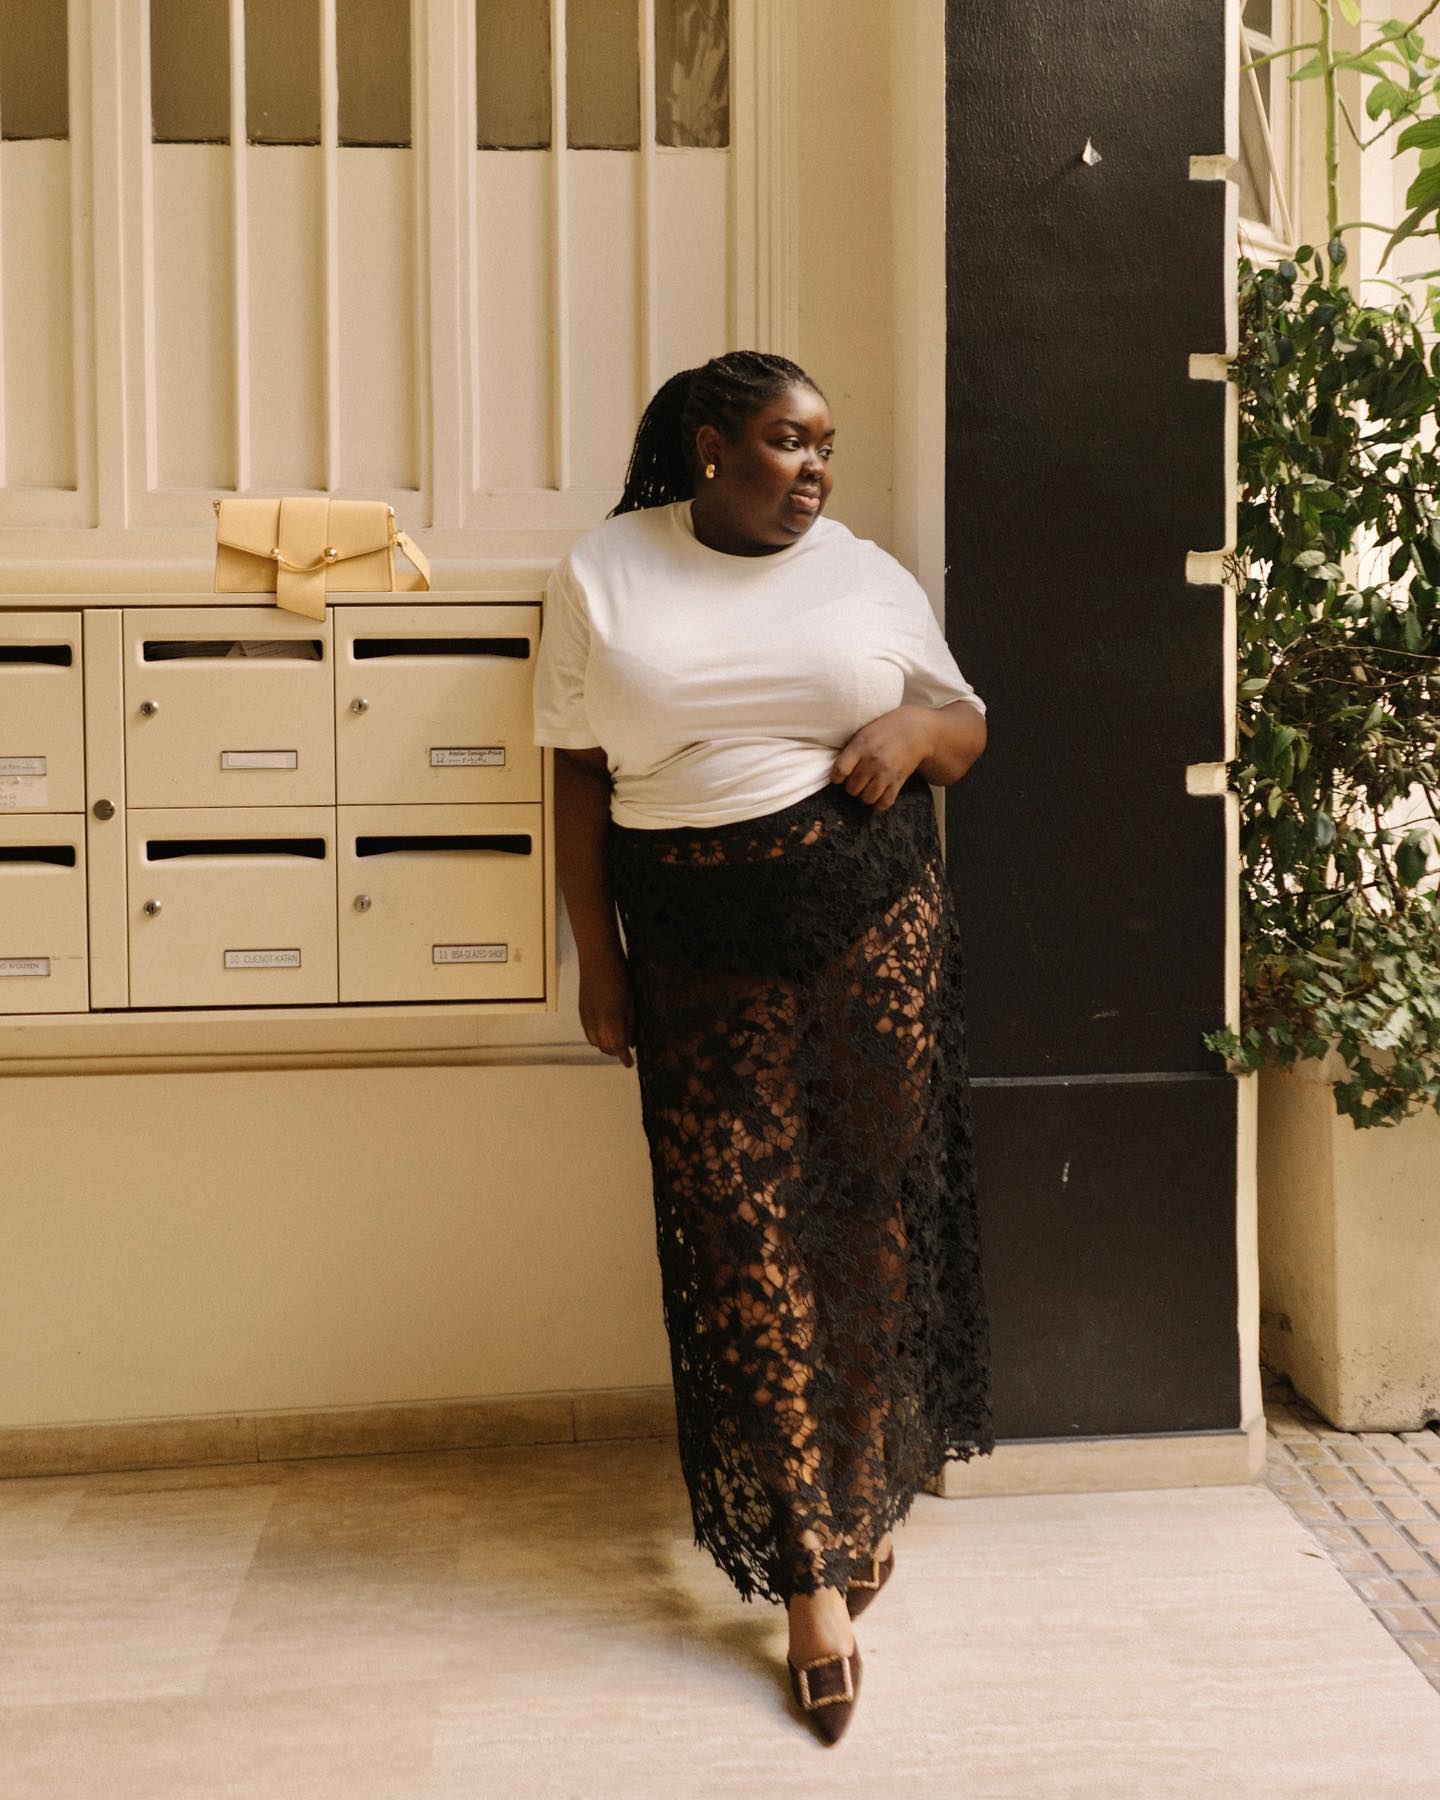 British influencer Abisola Omosole poses in a white t-shirt, sheer black lace skirt and heels